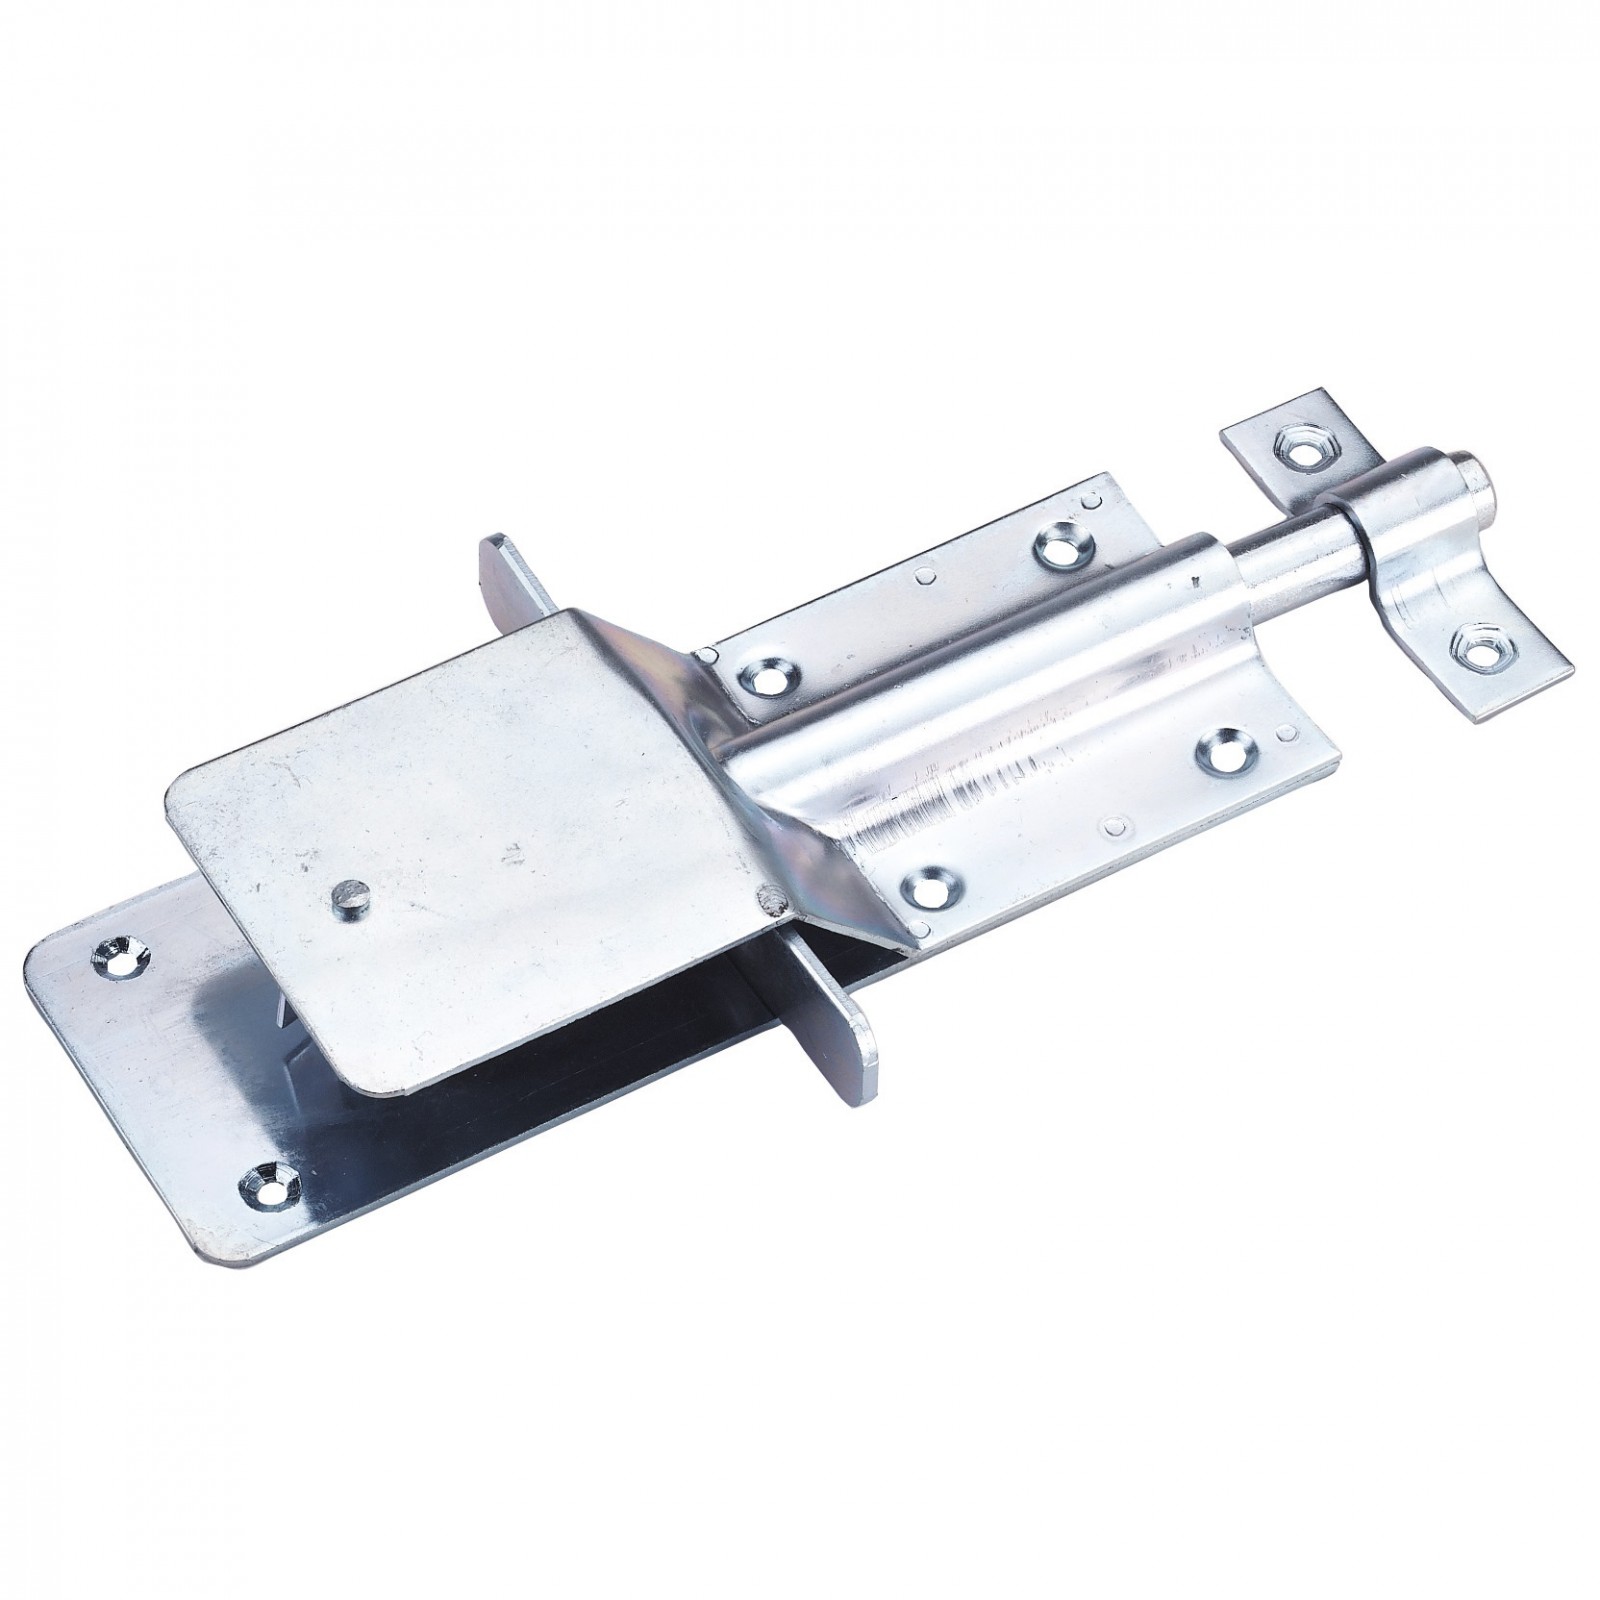 Stable gate latch with snap lock catch